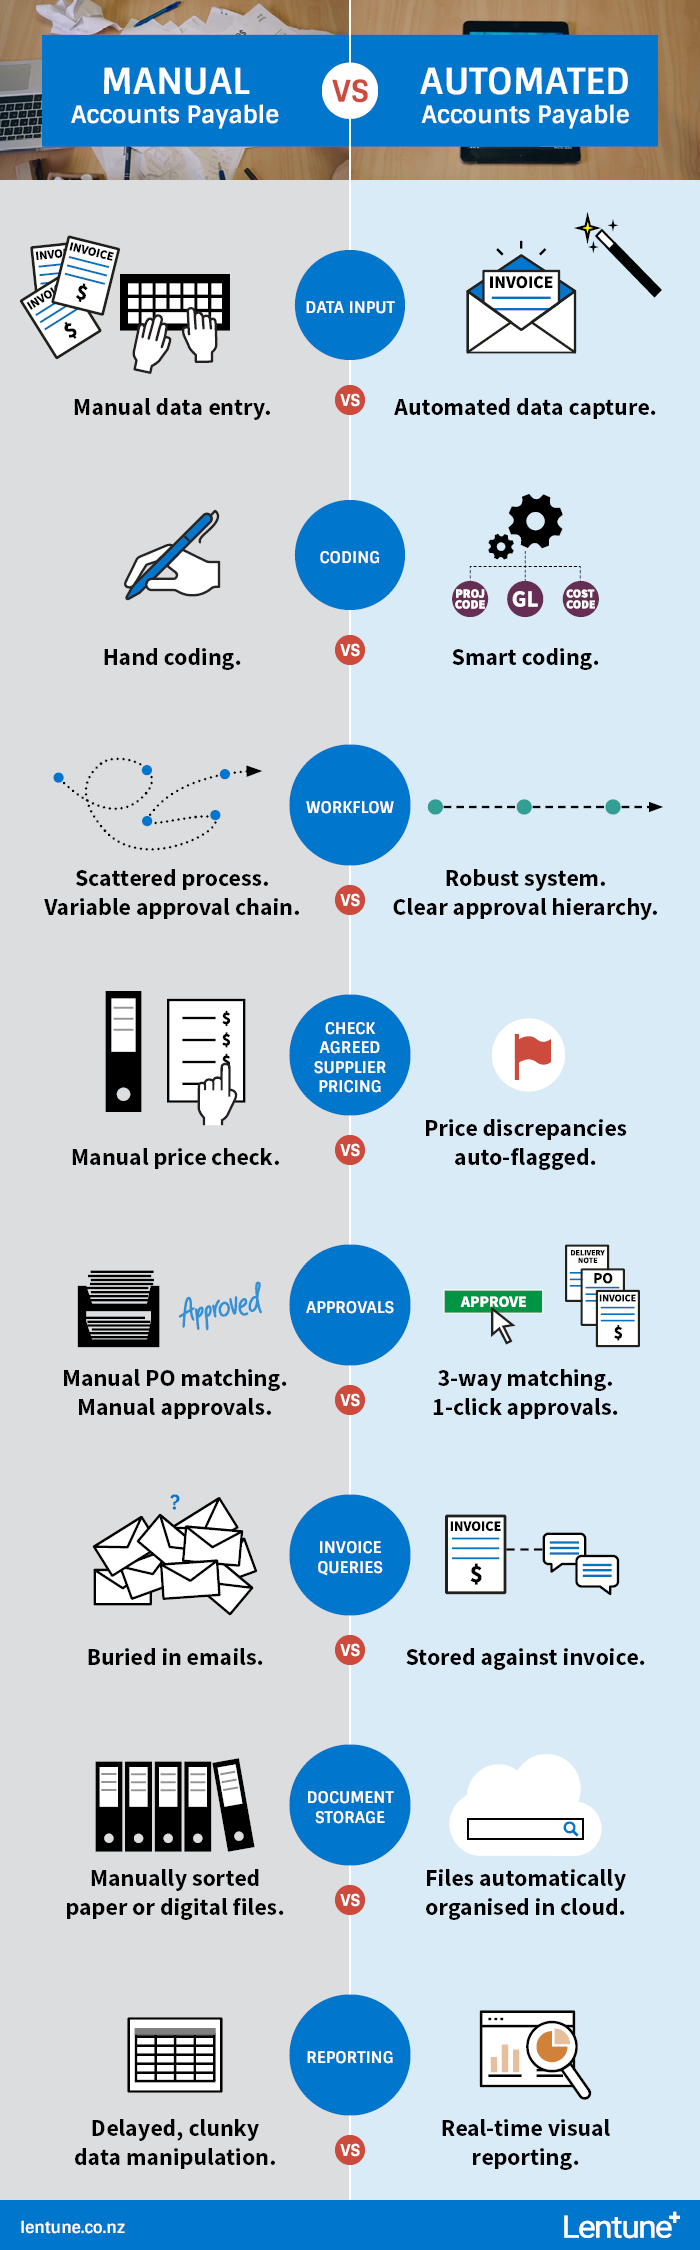 Infographic - Manual vs Automated Accounts Payable